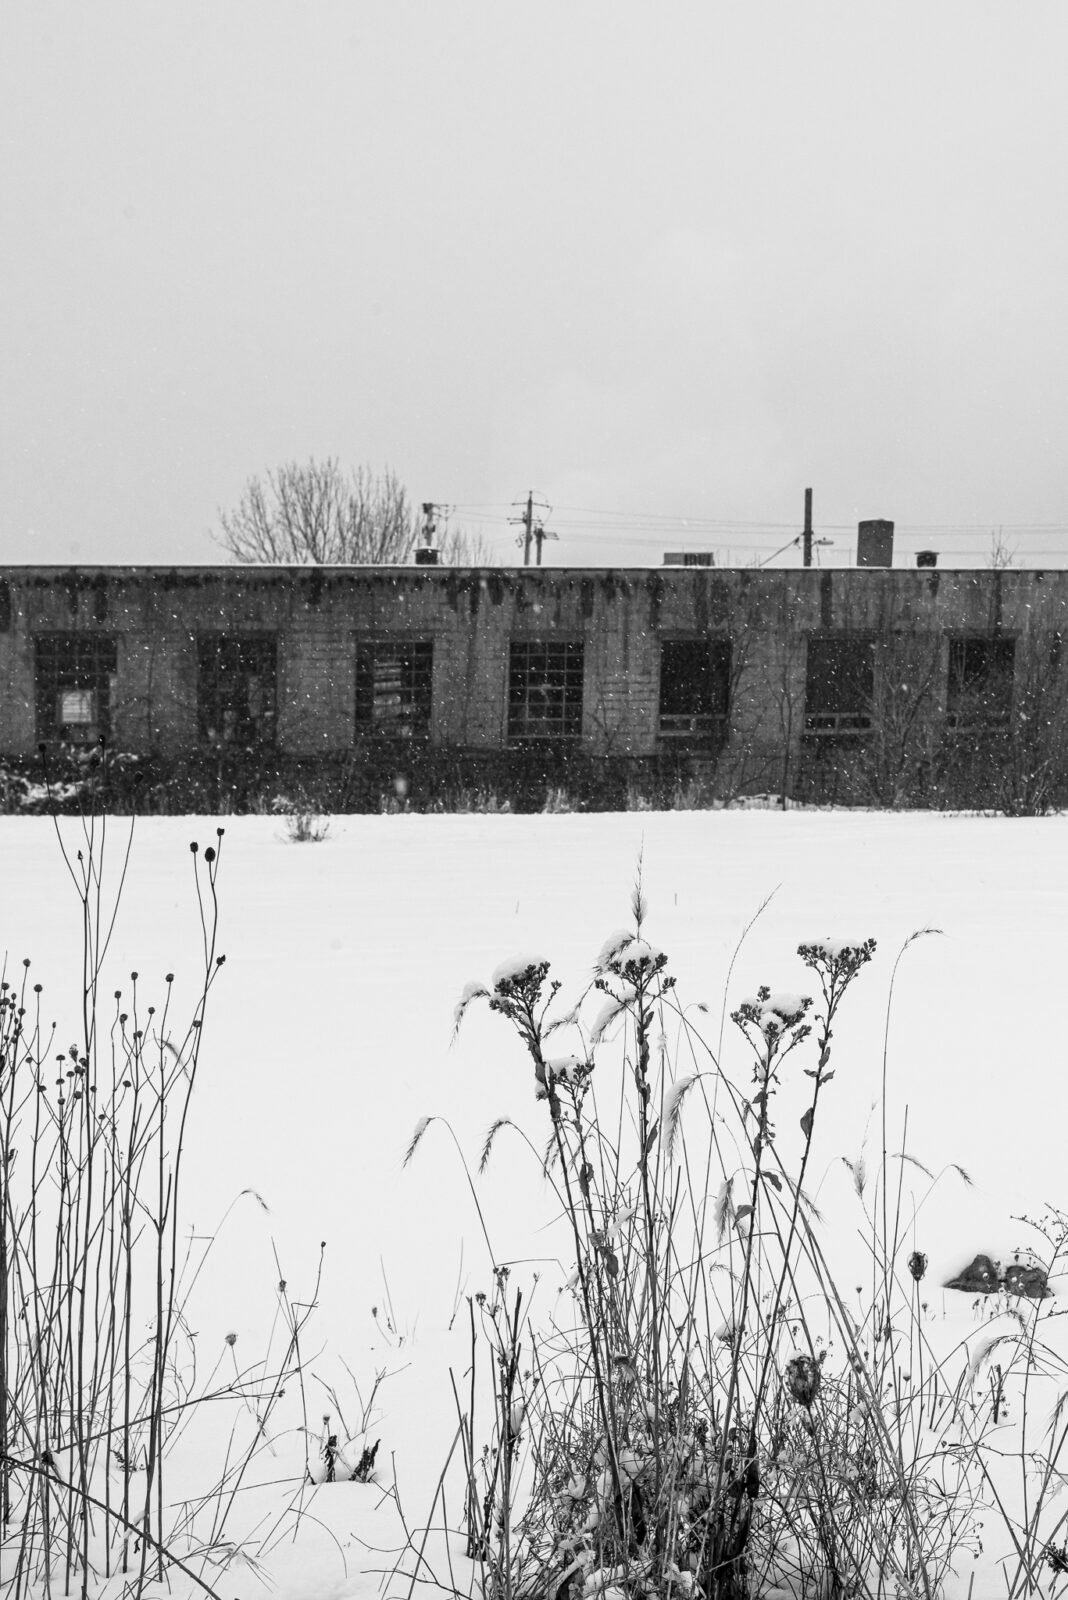 black and white photograph of snowy landscape with a one story factory building in the background and grey sky